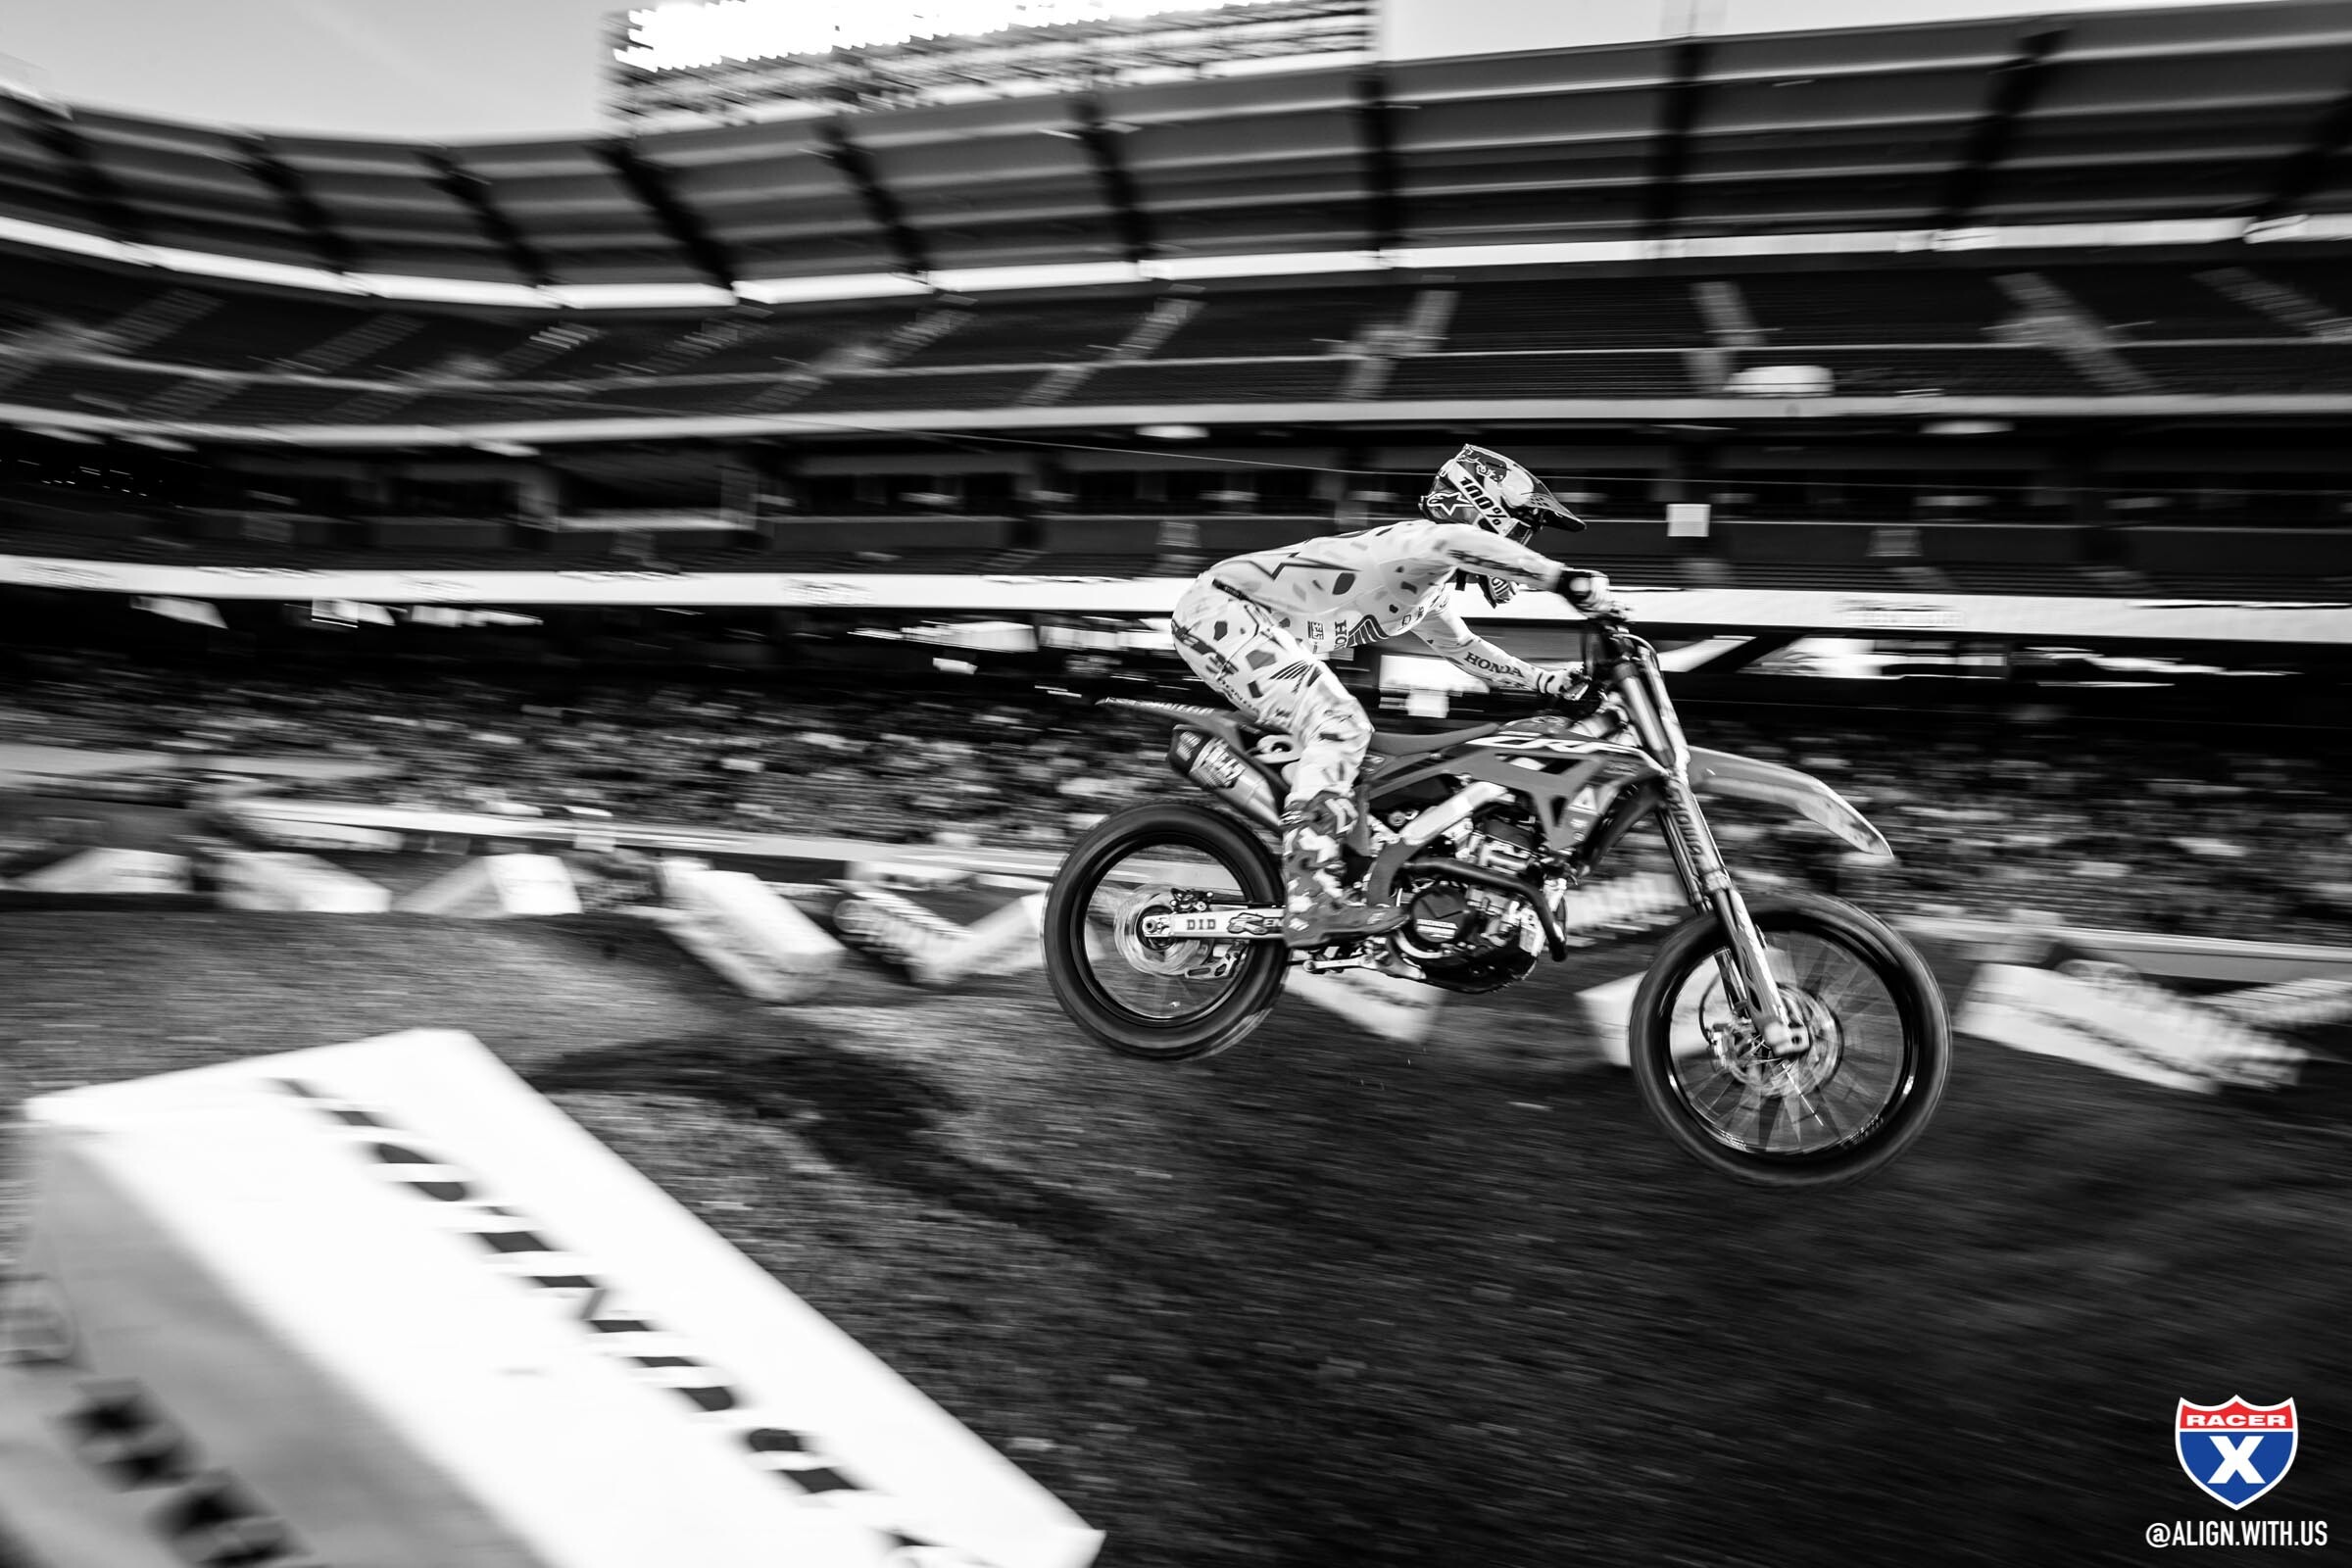 Photo Gallery from 2022 Anaheim 3 Supercross - Racer X